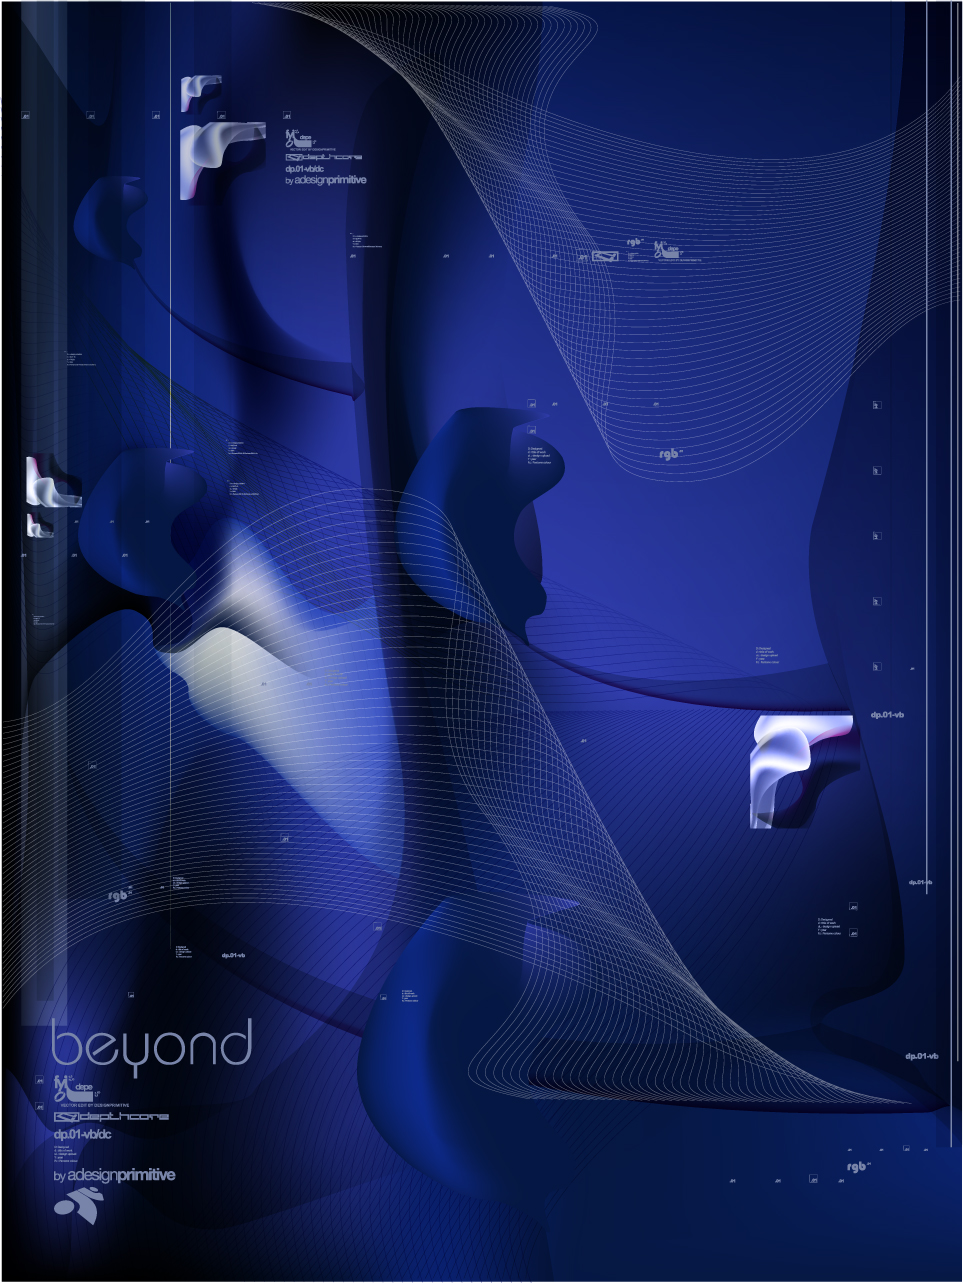 beyond by 